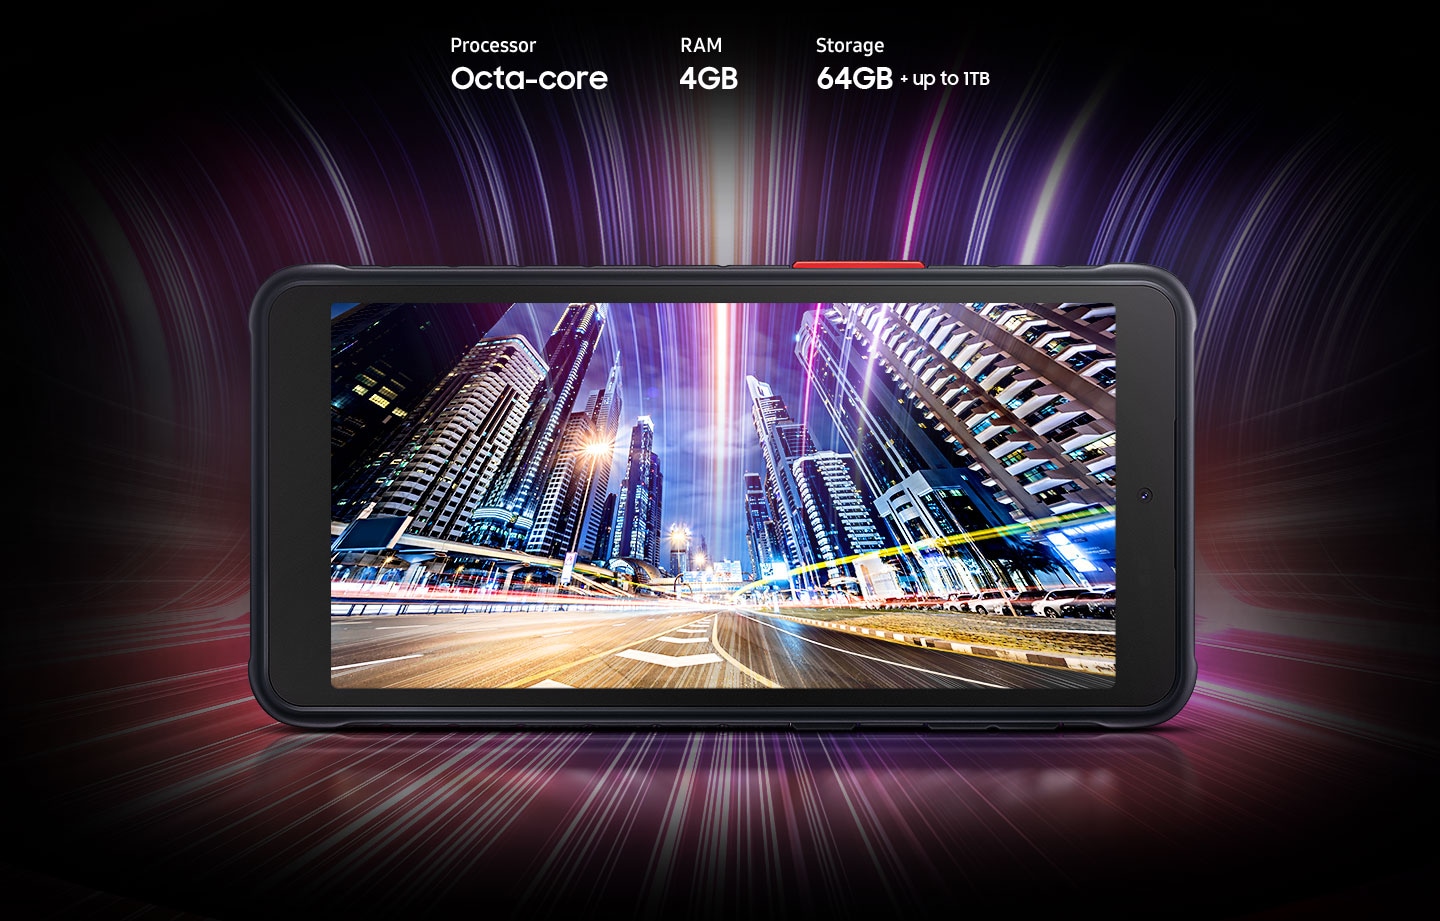 The display of the Galaxy XCover 5 shows a city at night, and shows that the device offers an octa-core processor, 4 GB of RAM, 64 GB and up to 1 TB of storage.